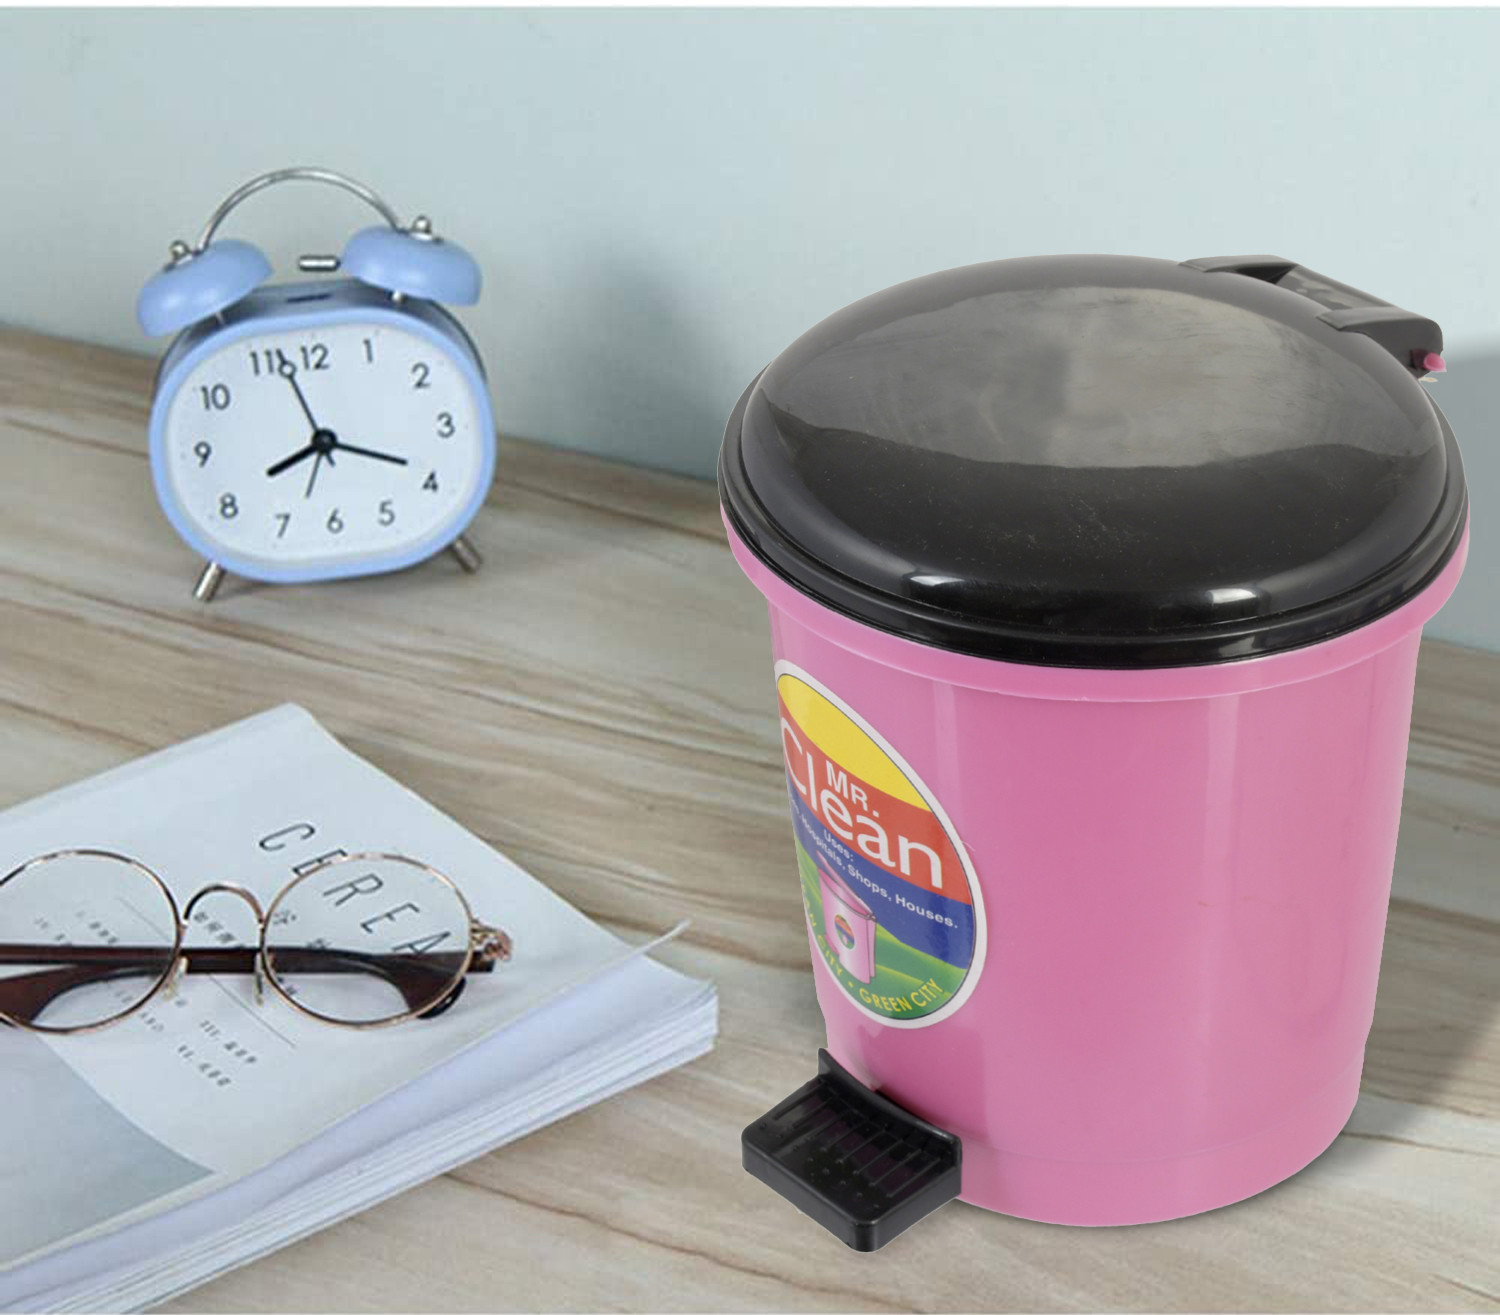 Kuber Industries 3 Pieces Table Top Desk Garbage Dustbin Trash for Office Home Work Place,2 Ltr(Pink & Blue & Purple)